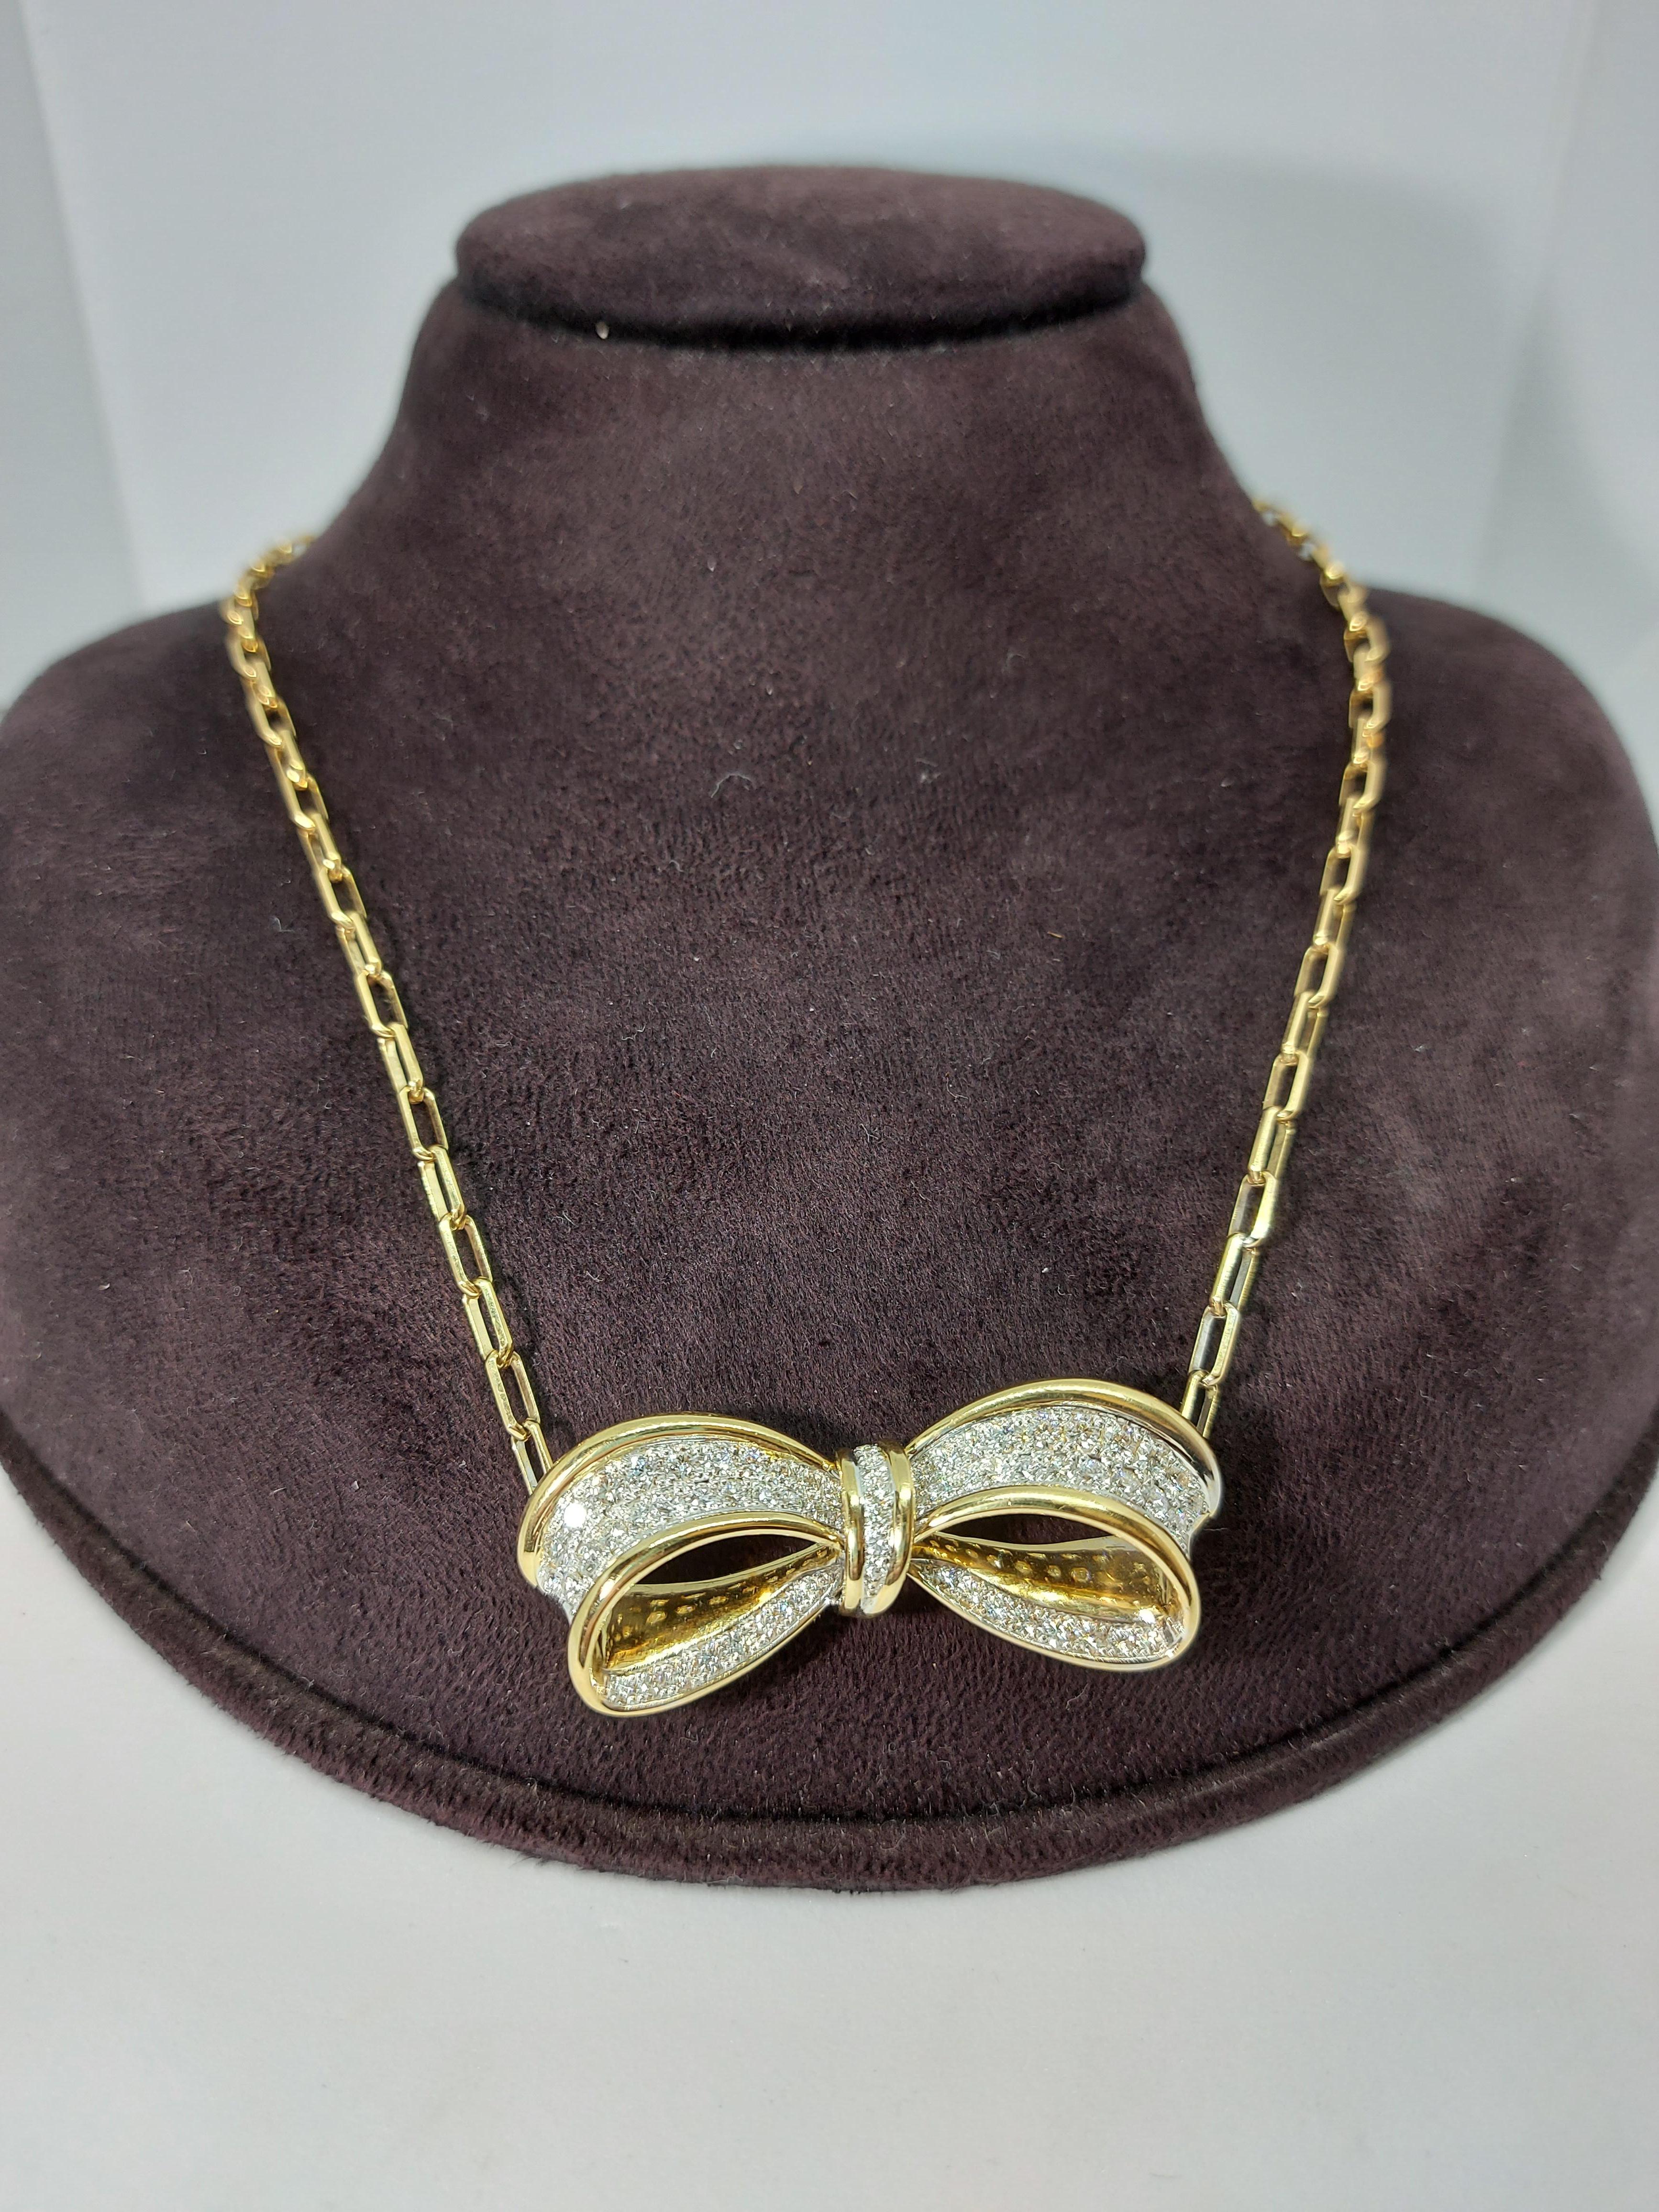 18 Karat Solid Yellow and White Gold Bow Necklace with Diamonds 3